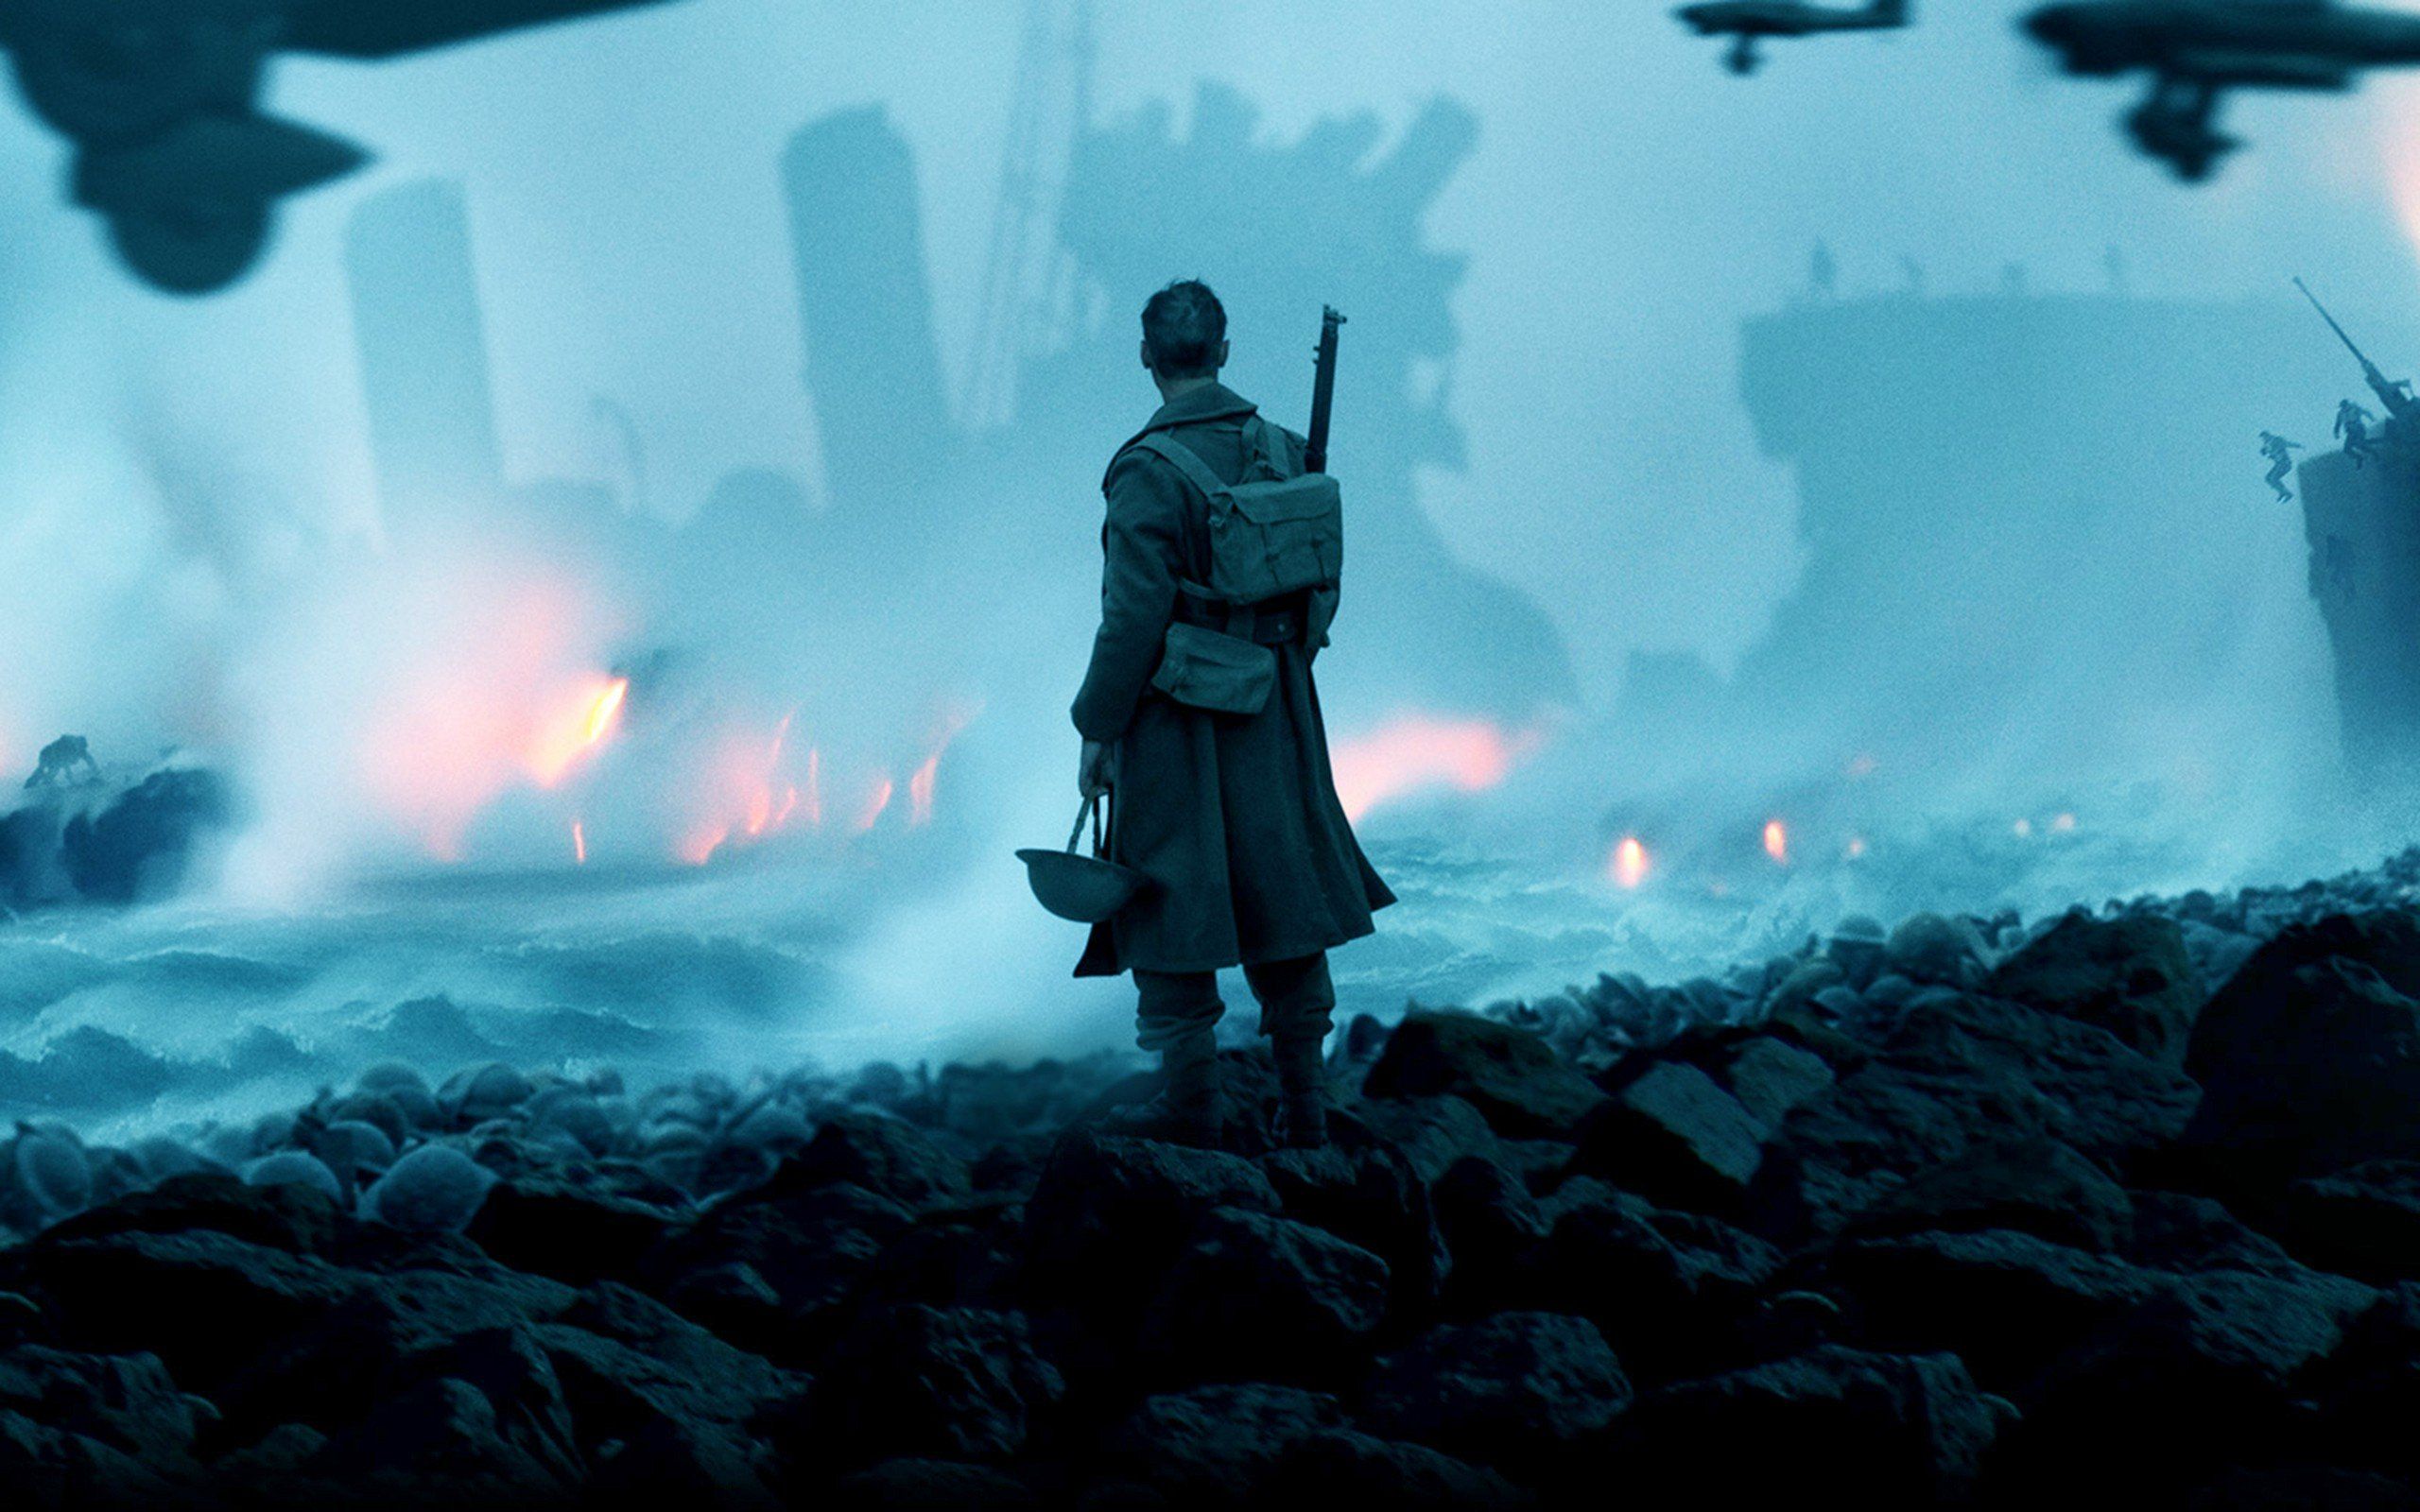 Dunkirk Movie Poster Wallpapers